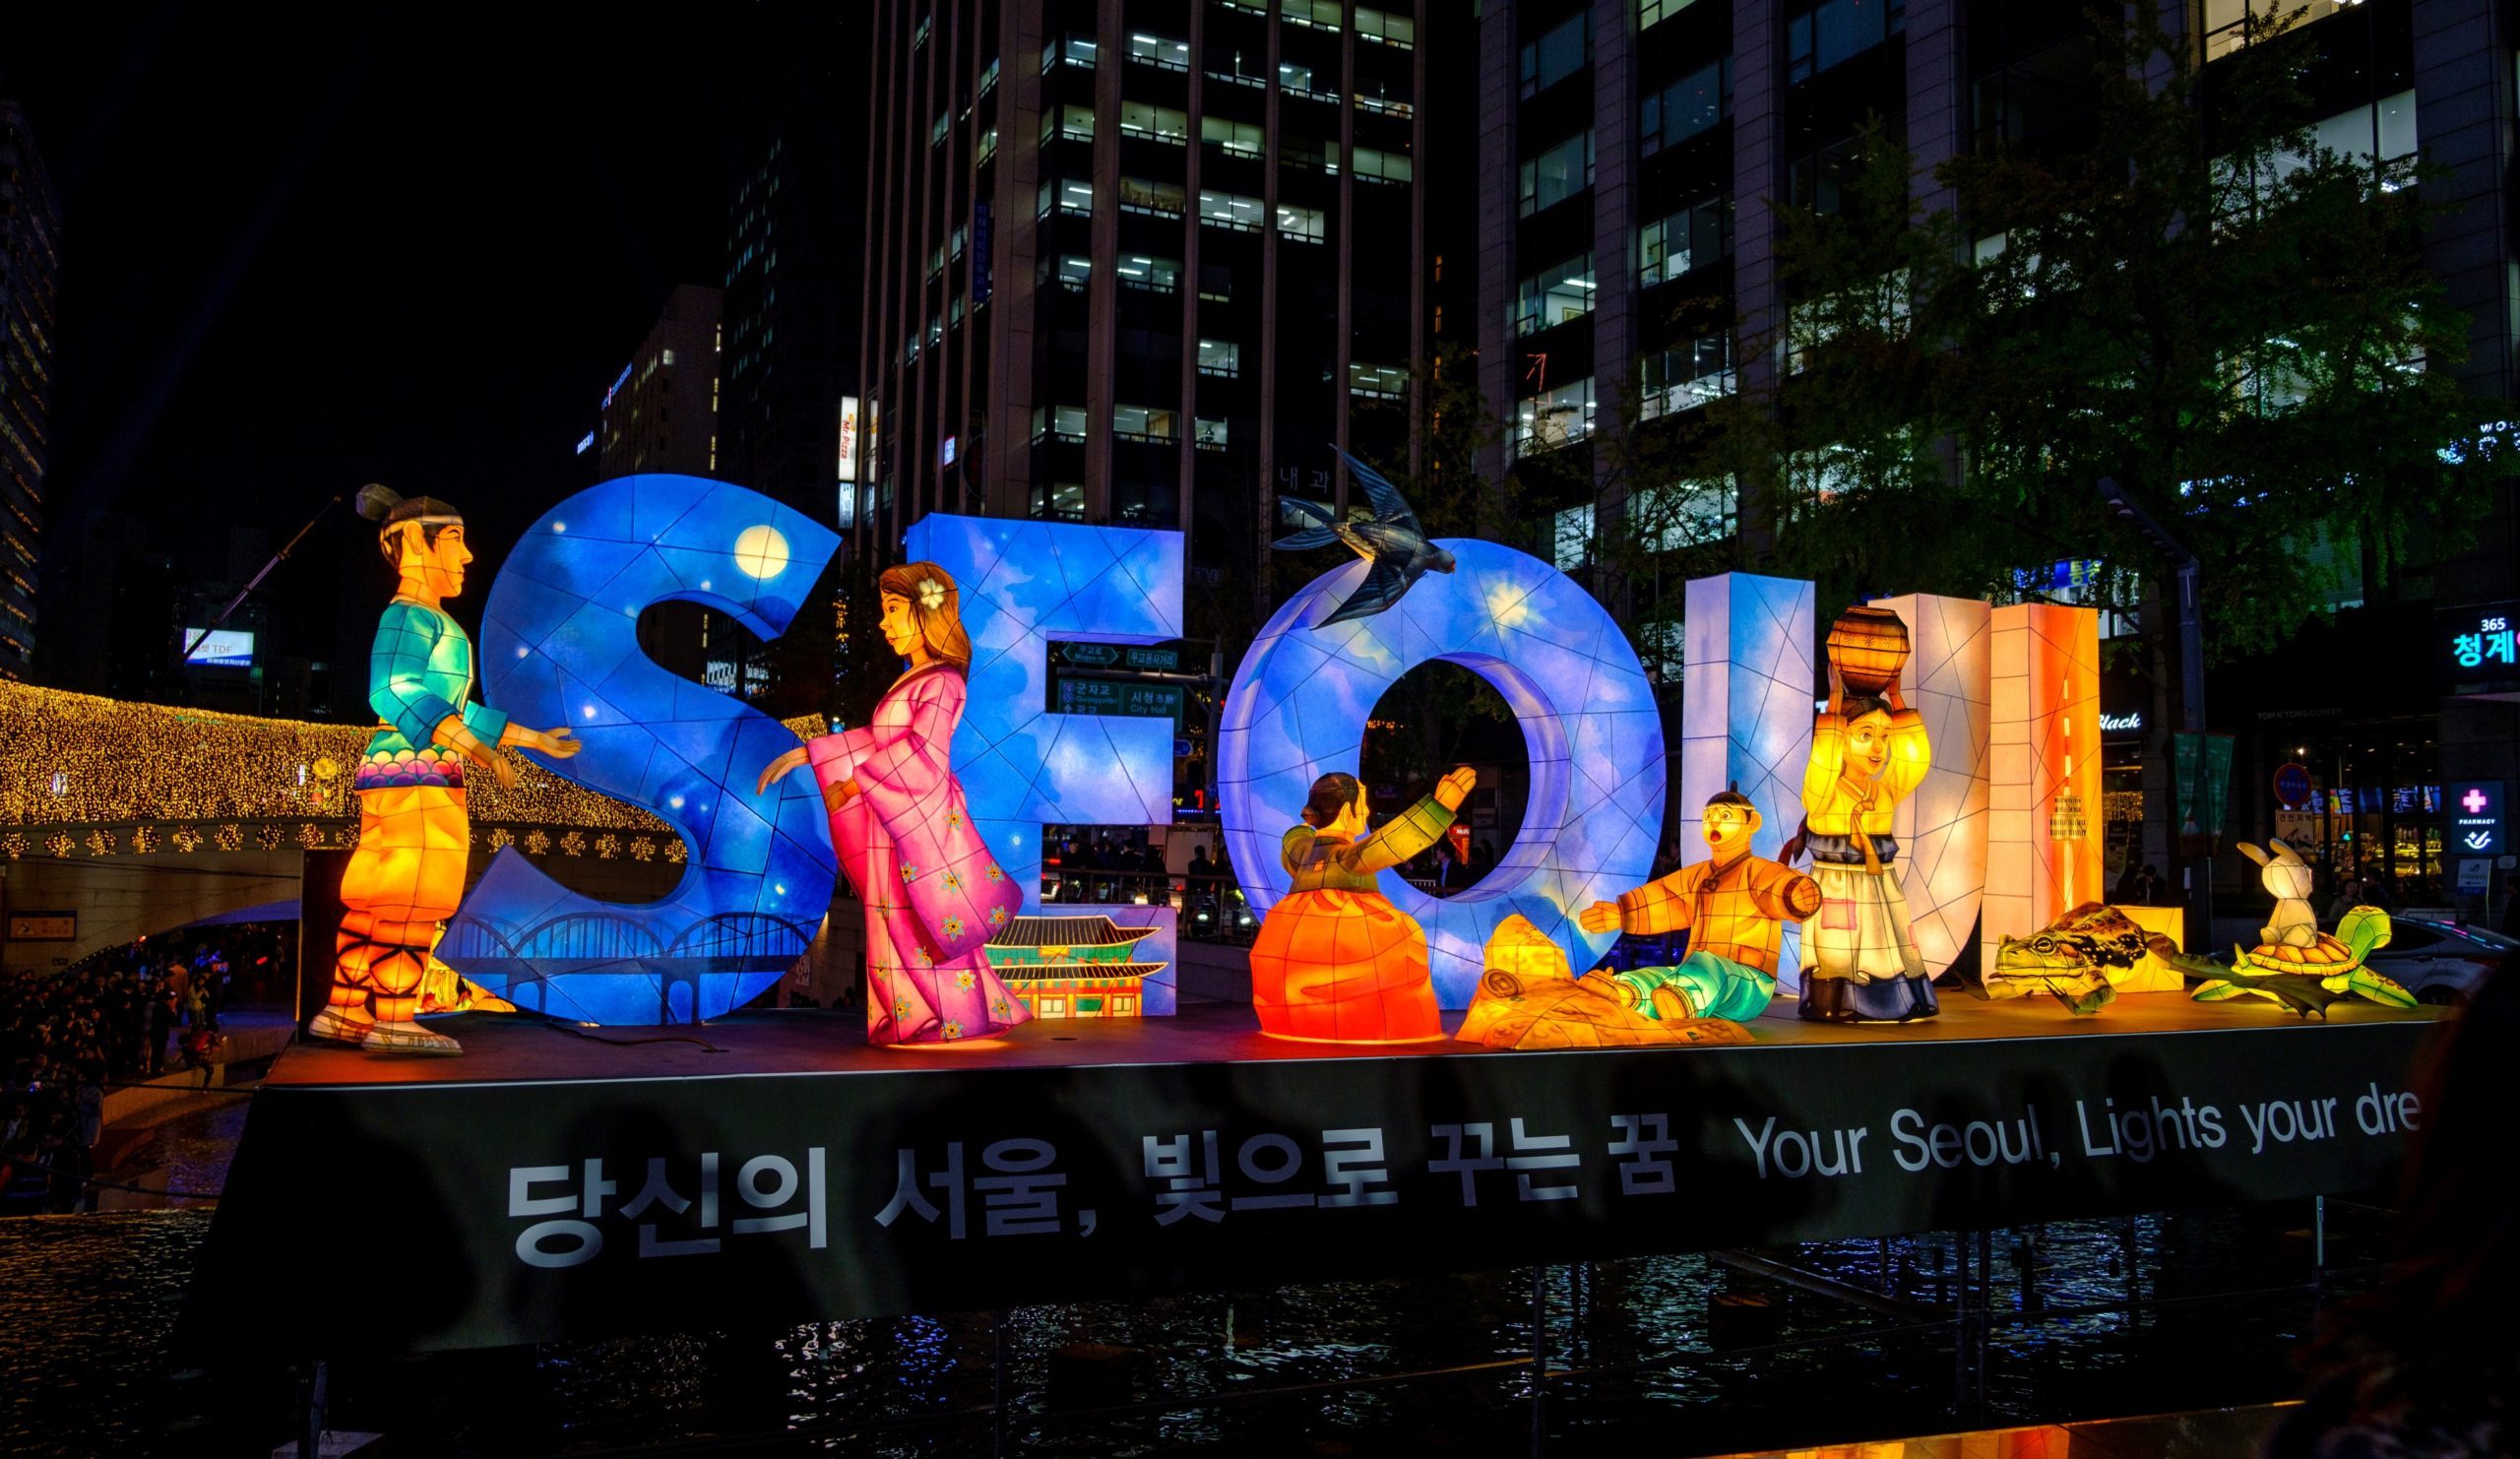 S Korea's Crescendo Equity Partners closes oversubscribed third fund at $910m